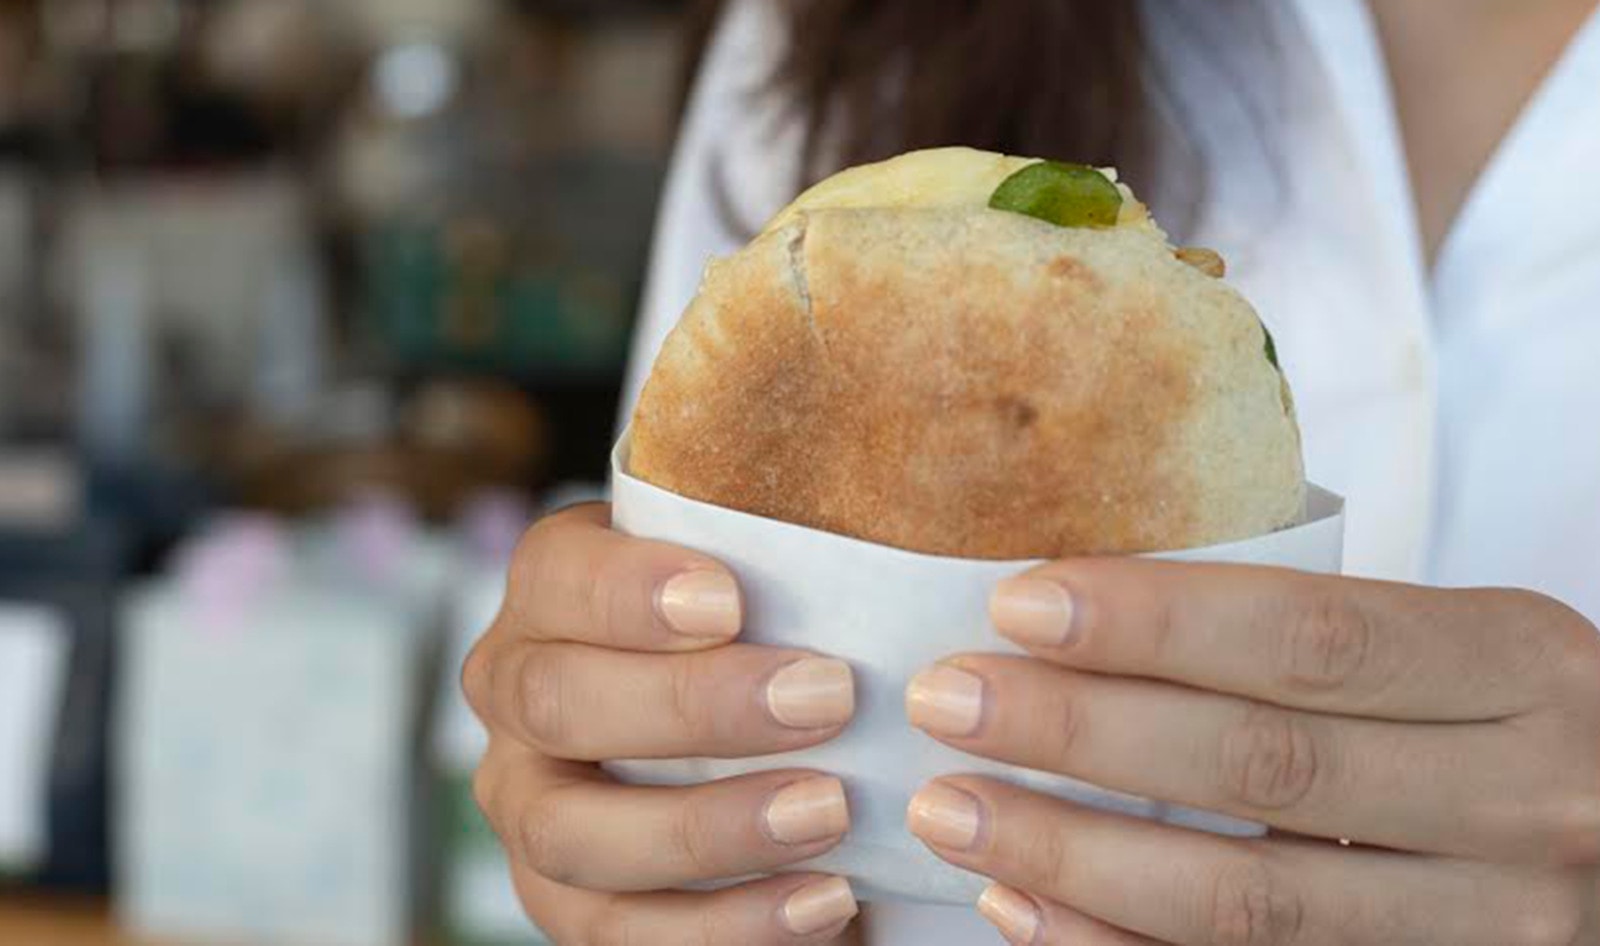 Vegan JUST Egg Sandwich Debuts at 24-Hour Eatery in Boston